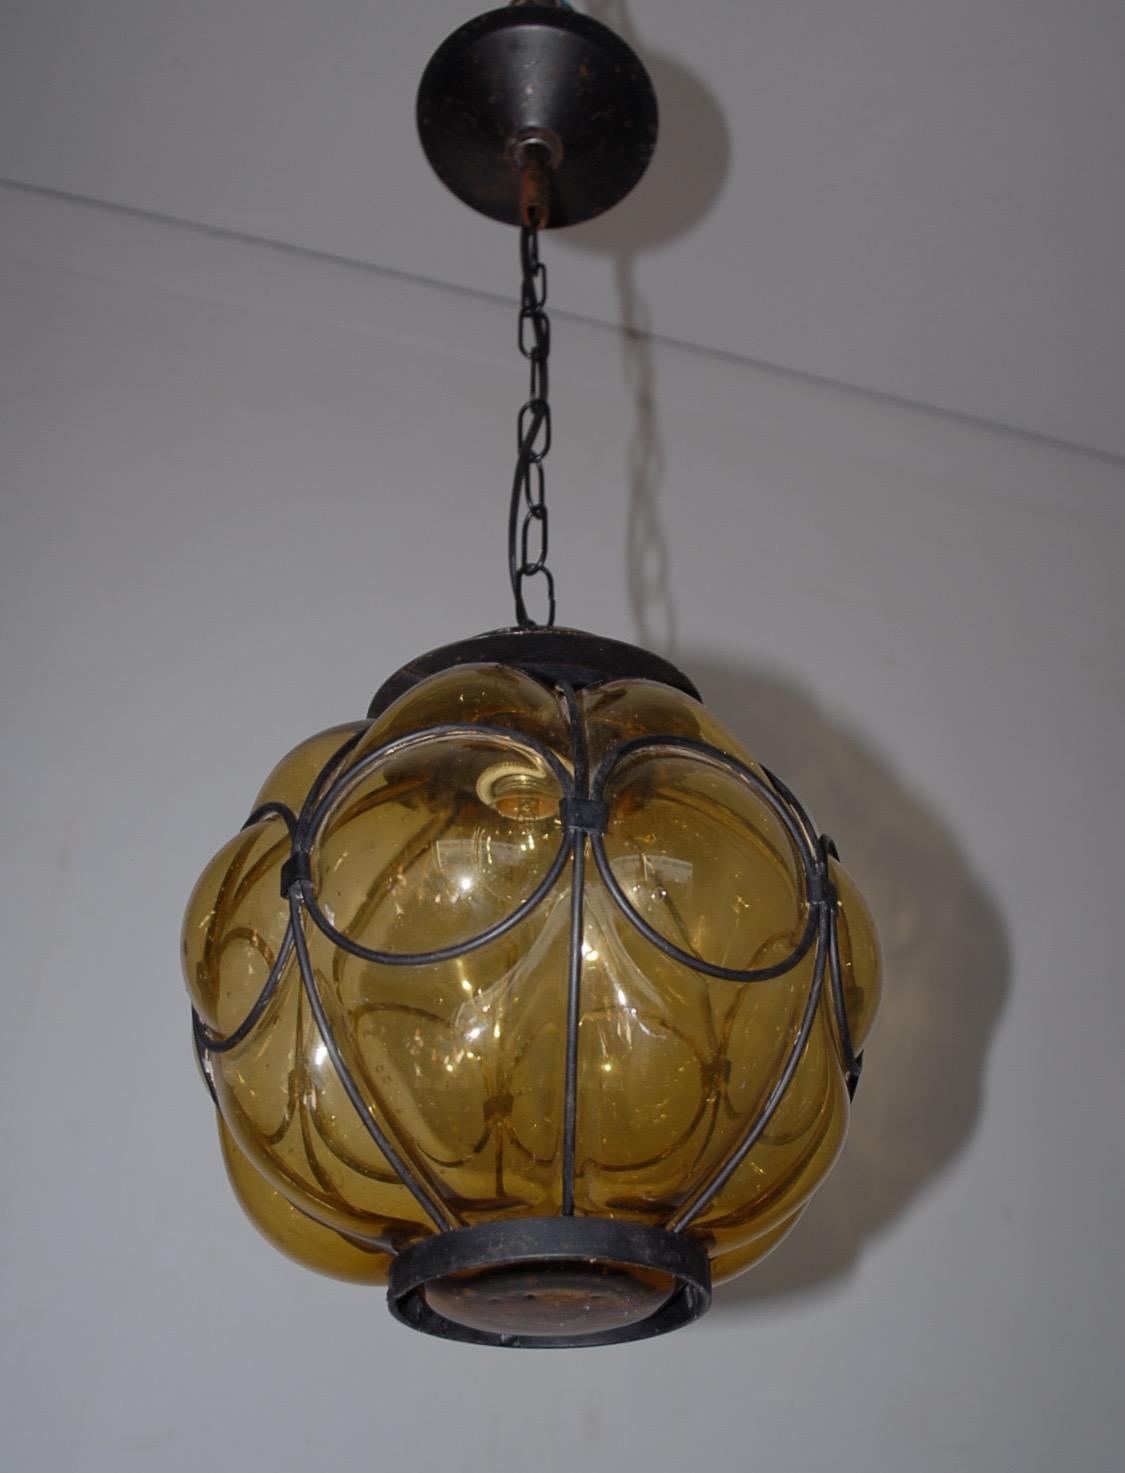 Rare & Handcrafted Midcentury Wrought Iron & Mouthblown Glass Venetian Pendant For Sale 4